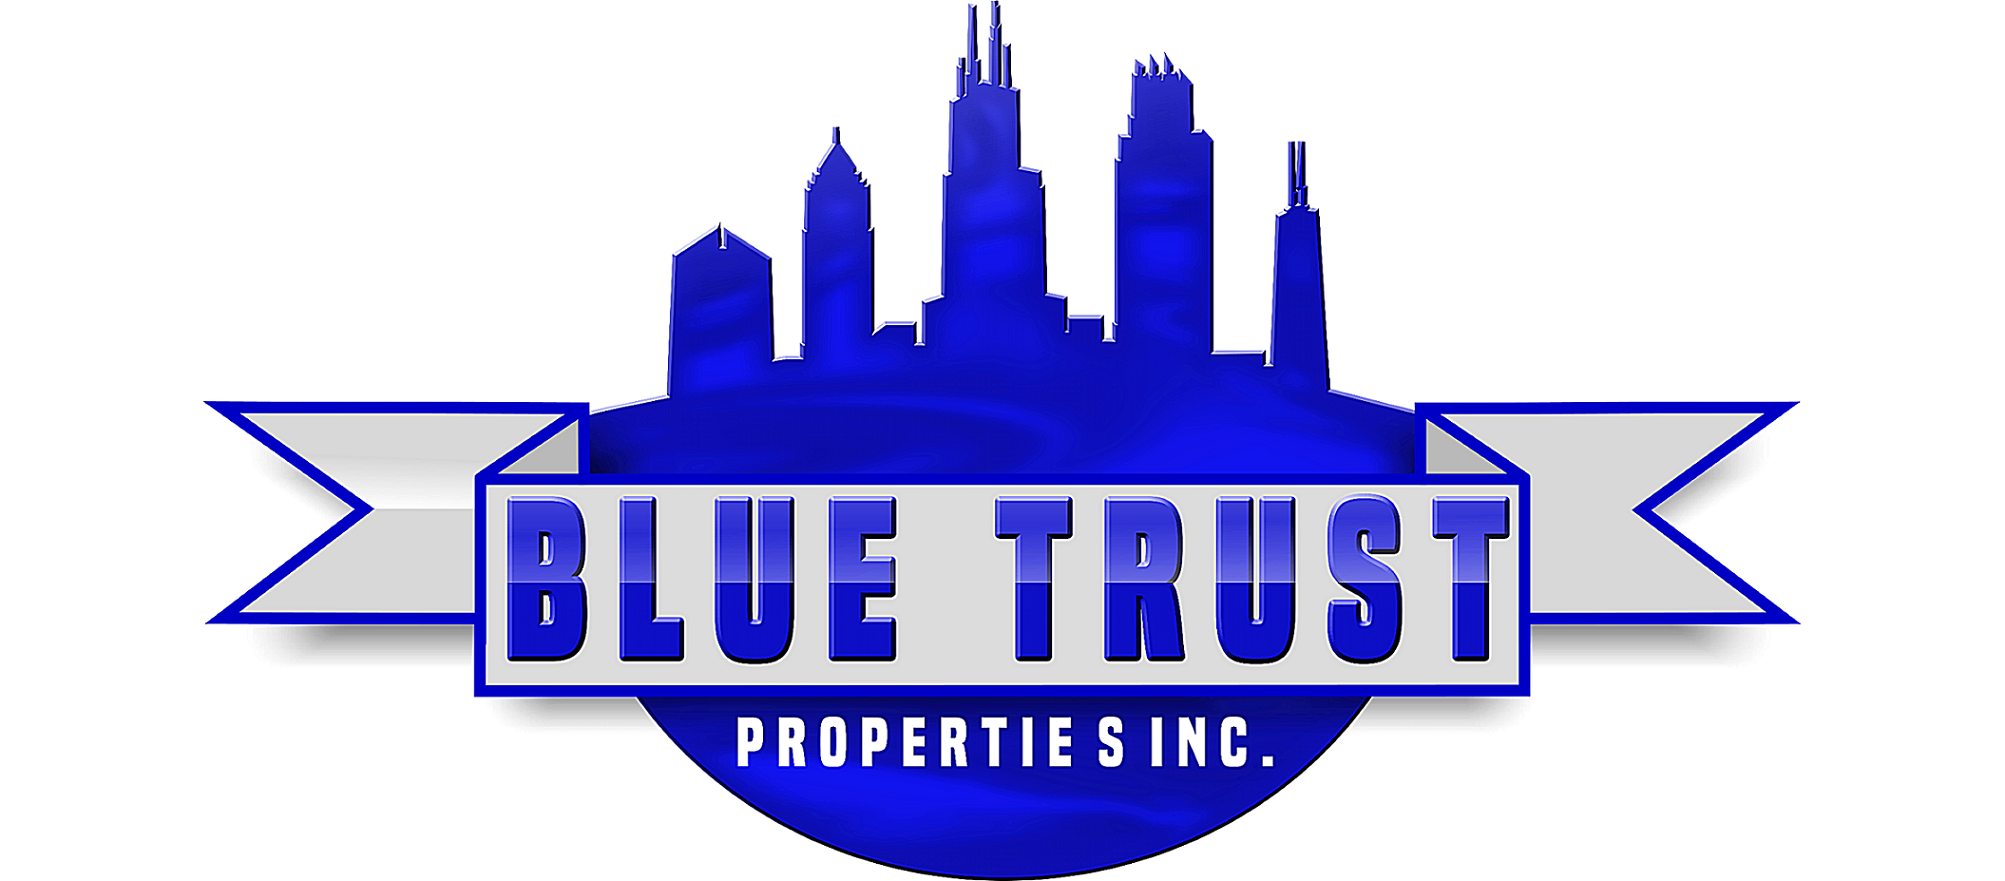 Blue Trust Properties: Who We Are & What We Do.